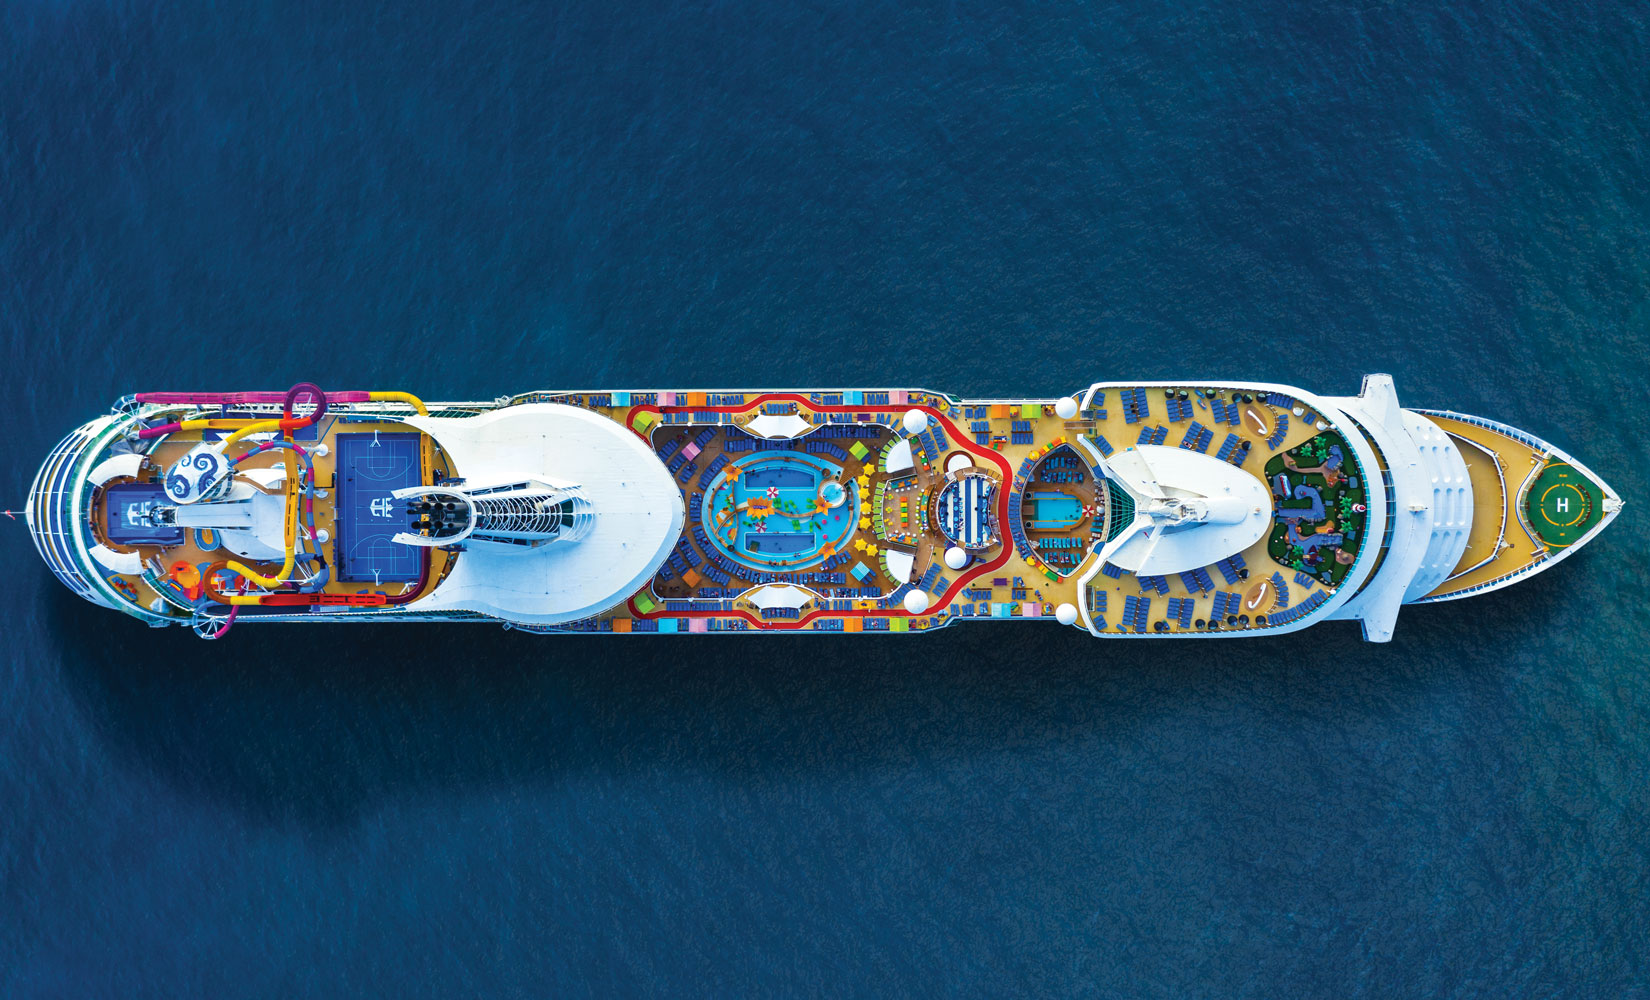 Finding the Right Ship for You | Royal Caribbean Blog